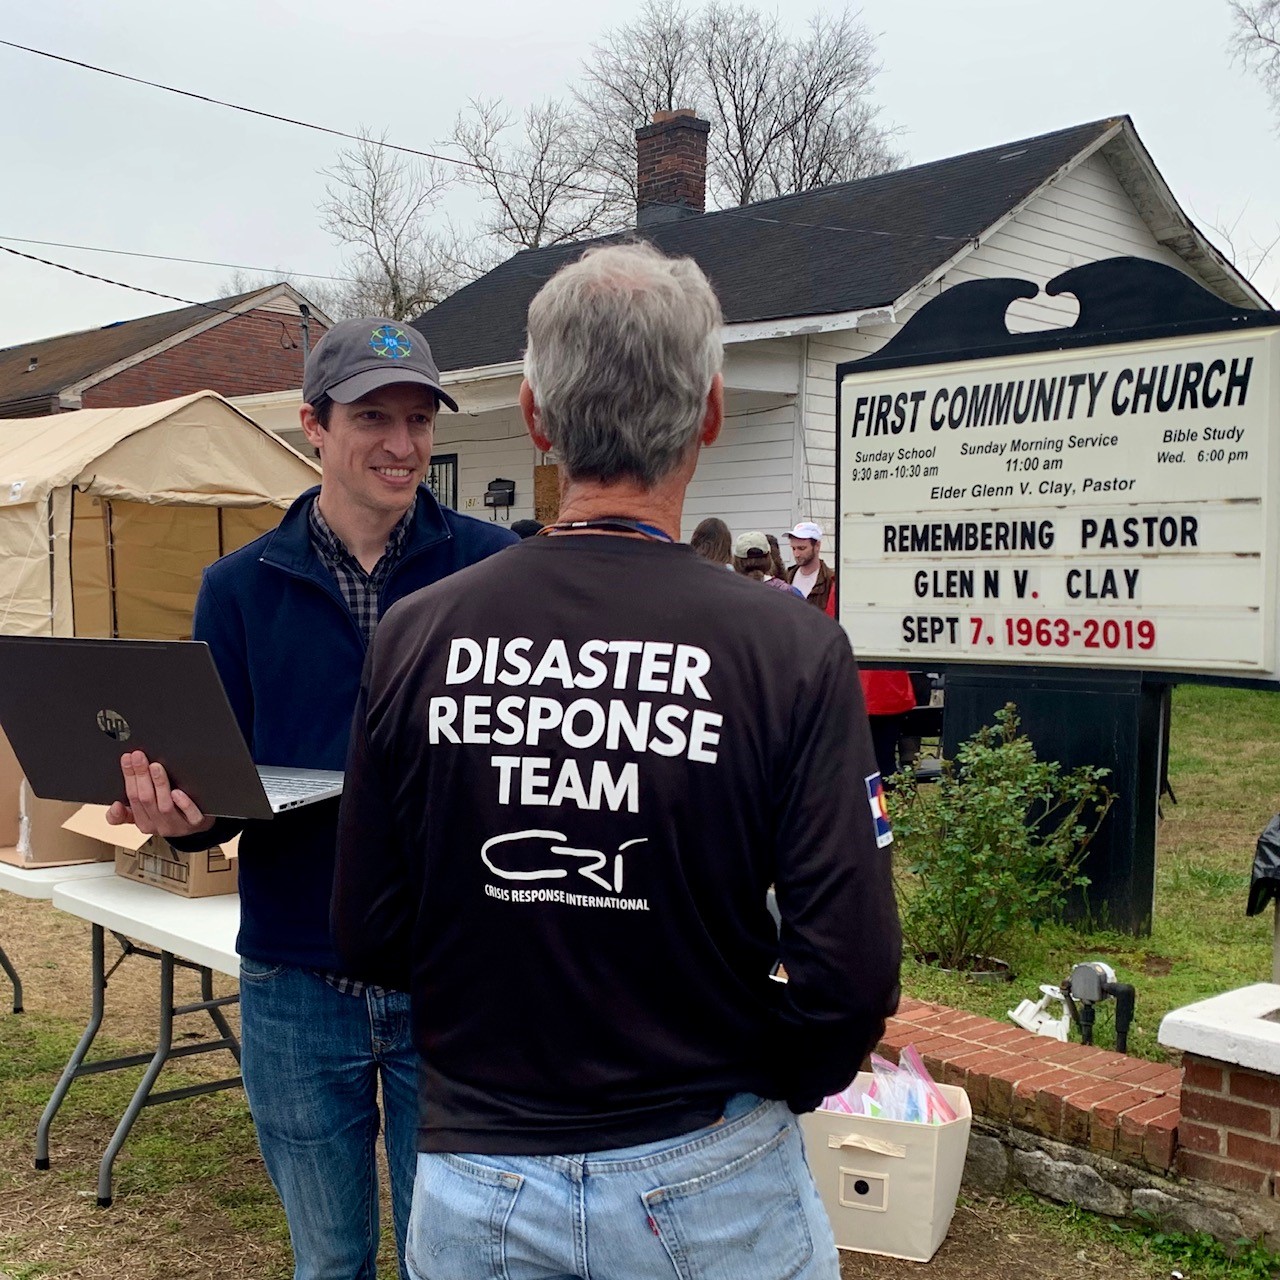 Disaster Relief Team